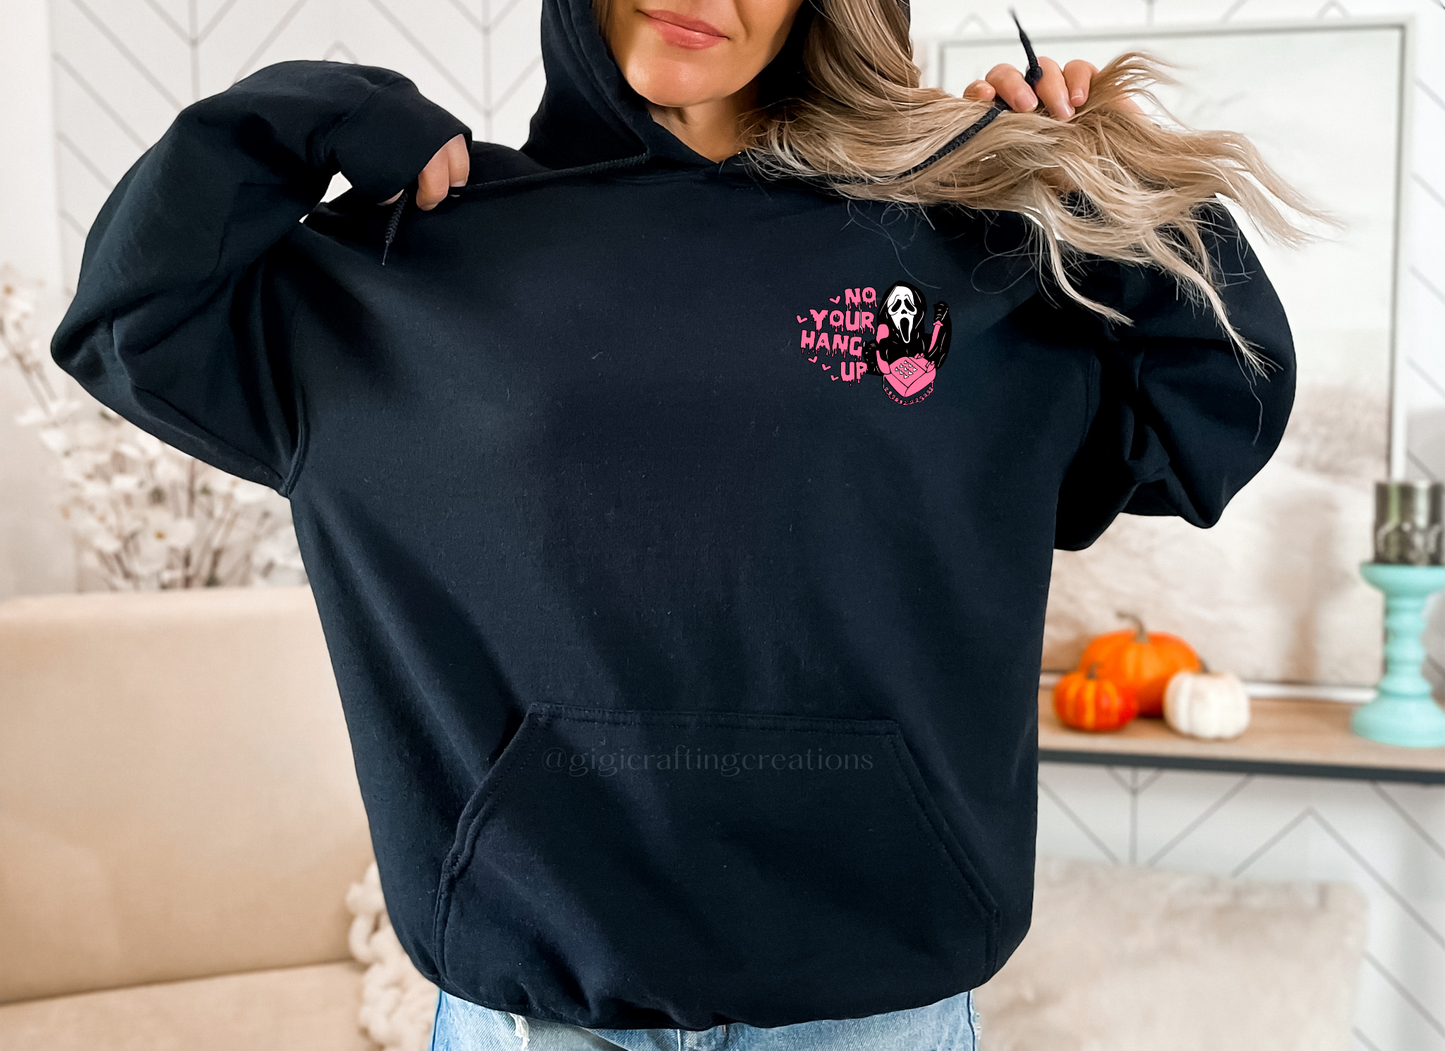 Copy of No Your Hang Up Left Chest Hoodie